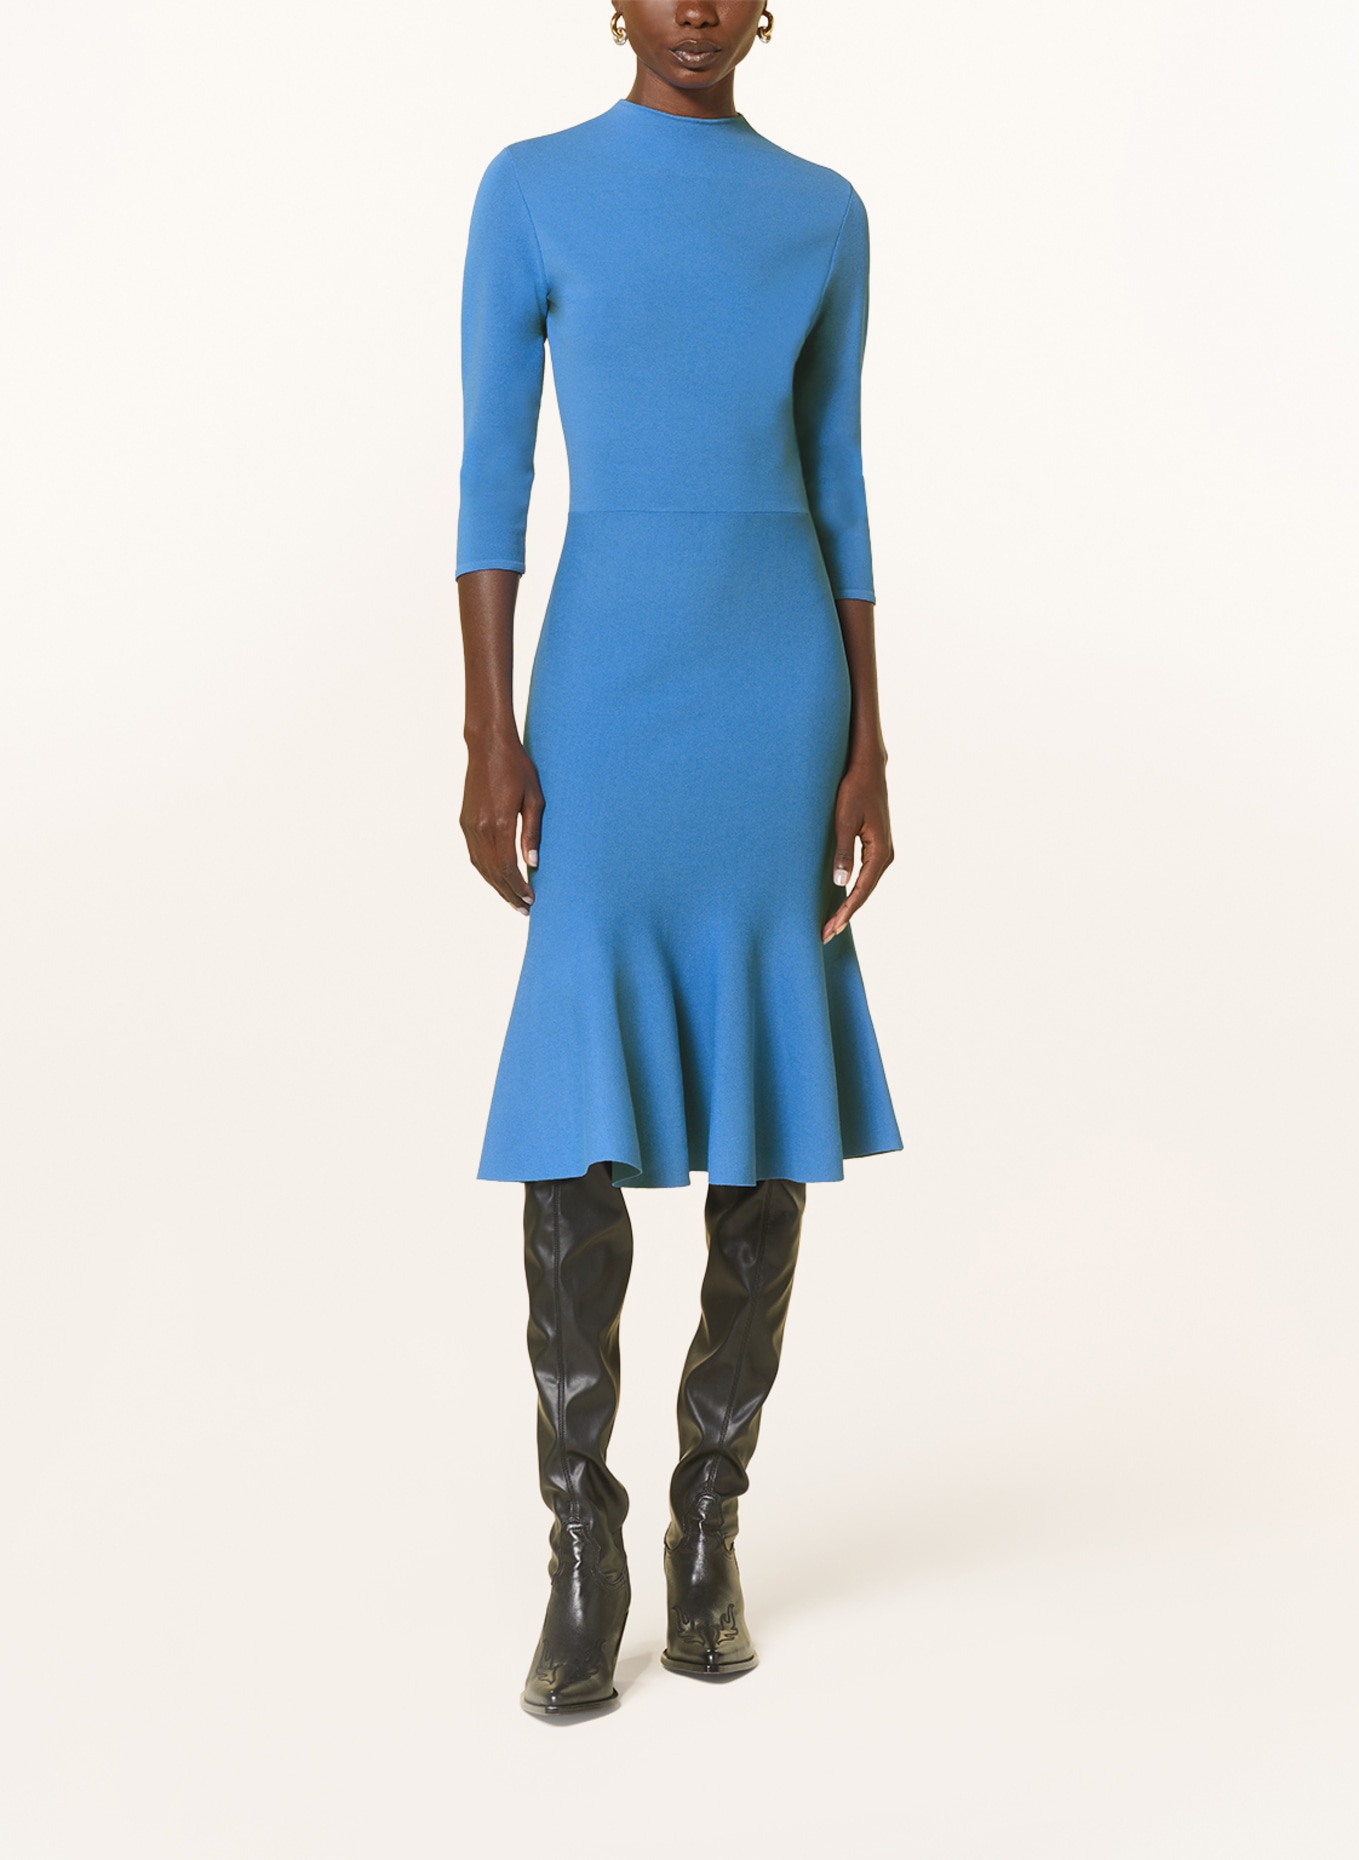 STELLA McCARTNEY Knit dress with 3/4 sleeve, Color: BLUE (Image 2)